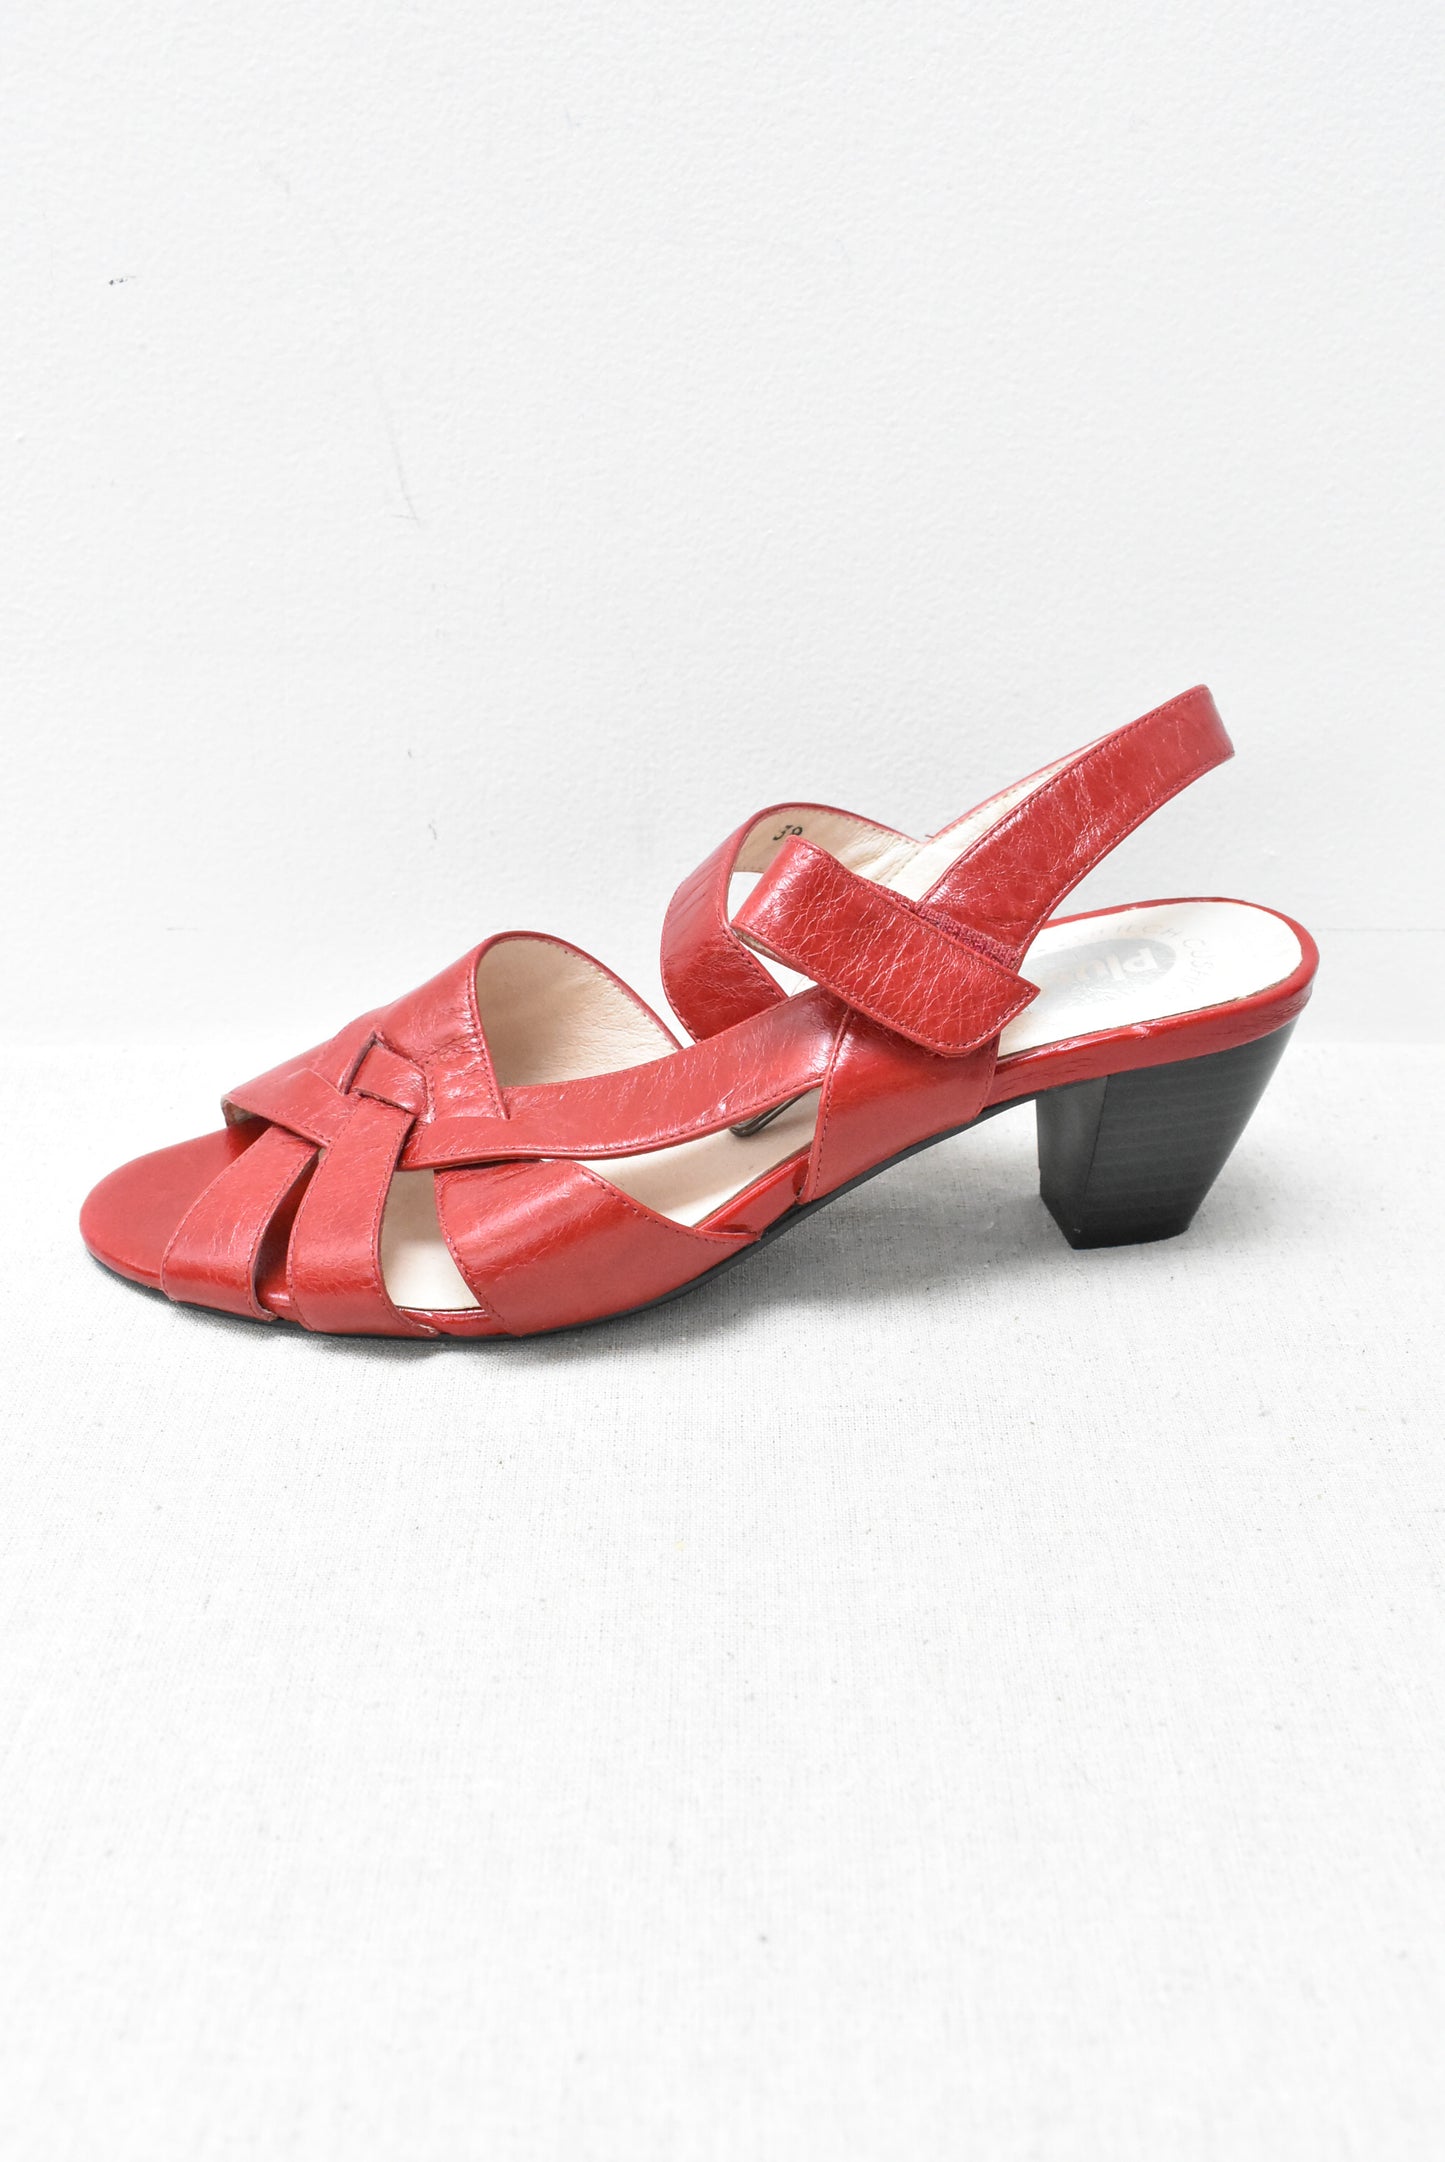 Plush by Mileno red leather sandals, 38